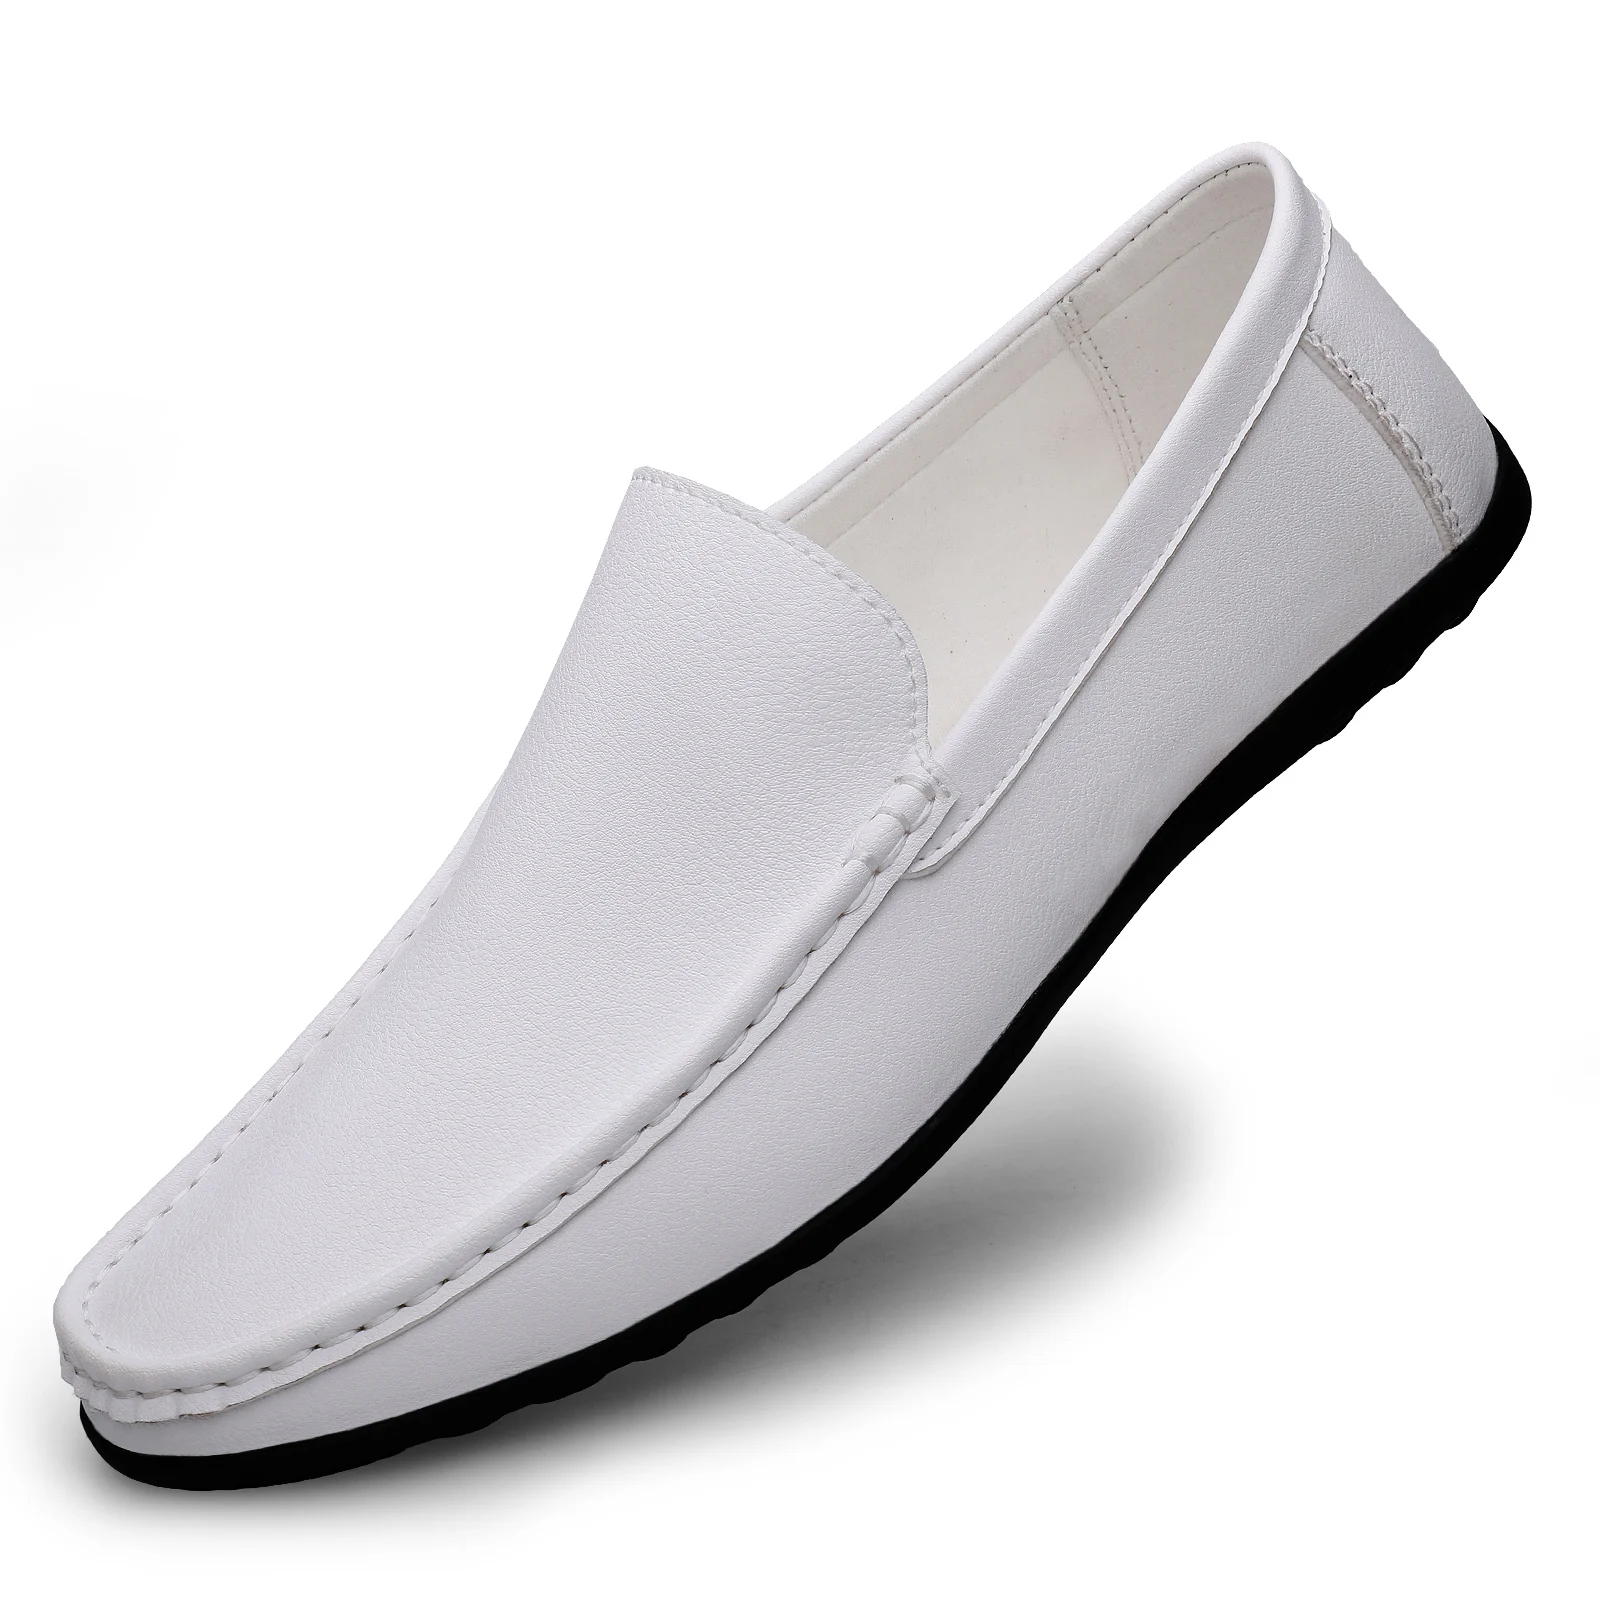 Fashion Mens Shoes High Quality Brand Loafers Comfy Leather Boats Shoes ... - $46.21